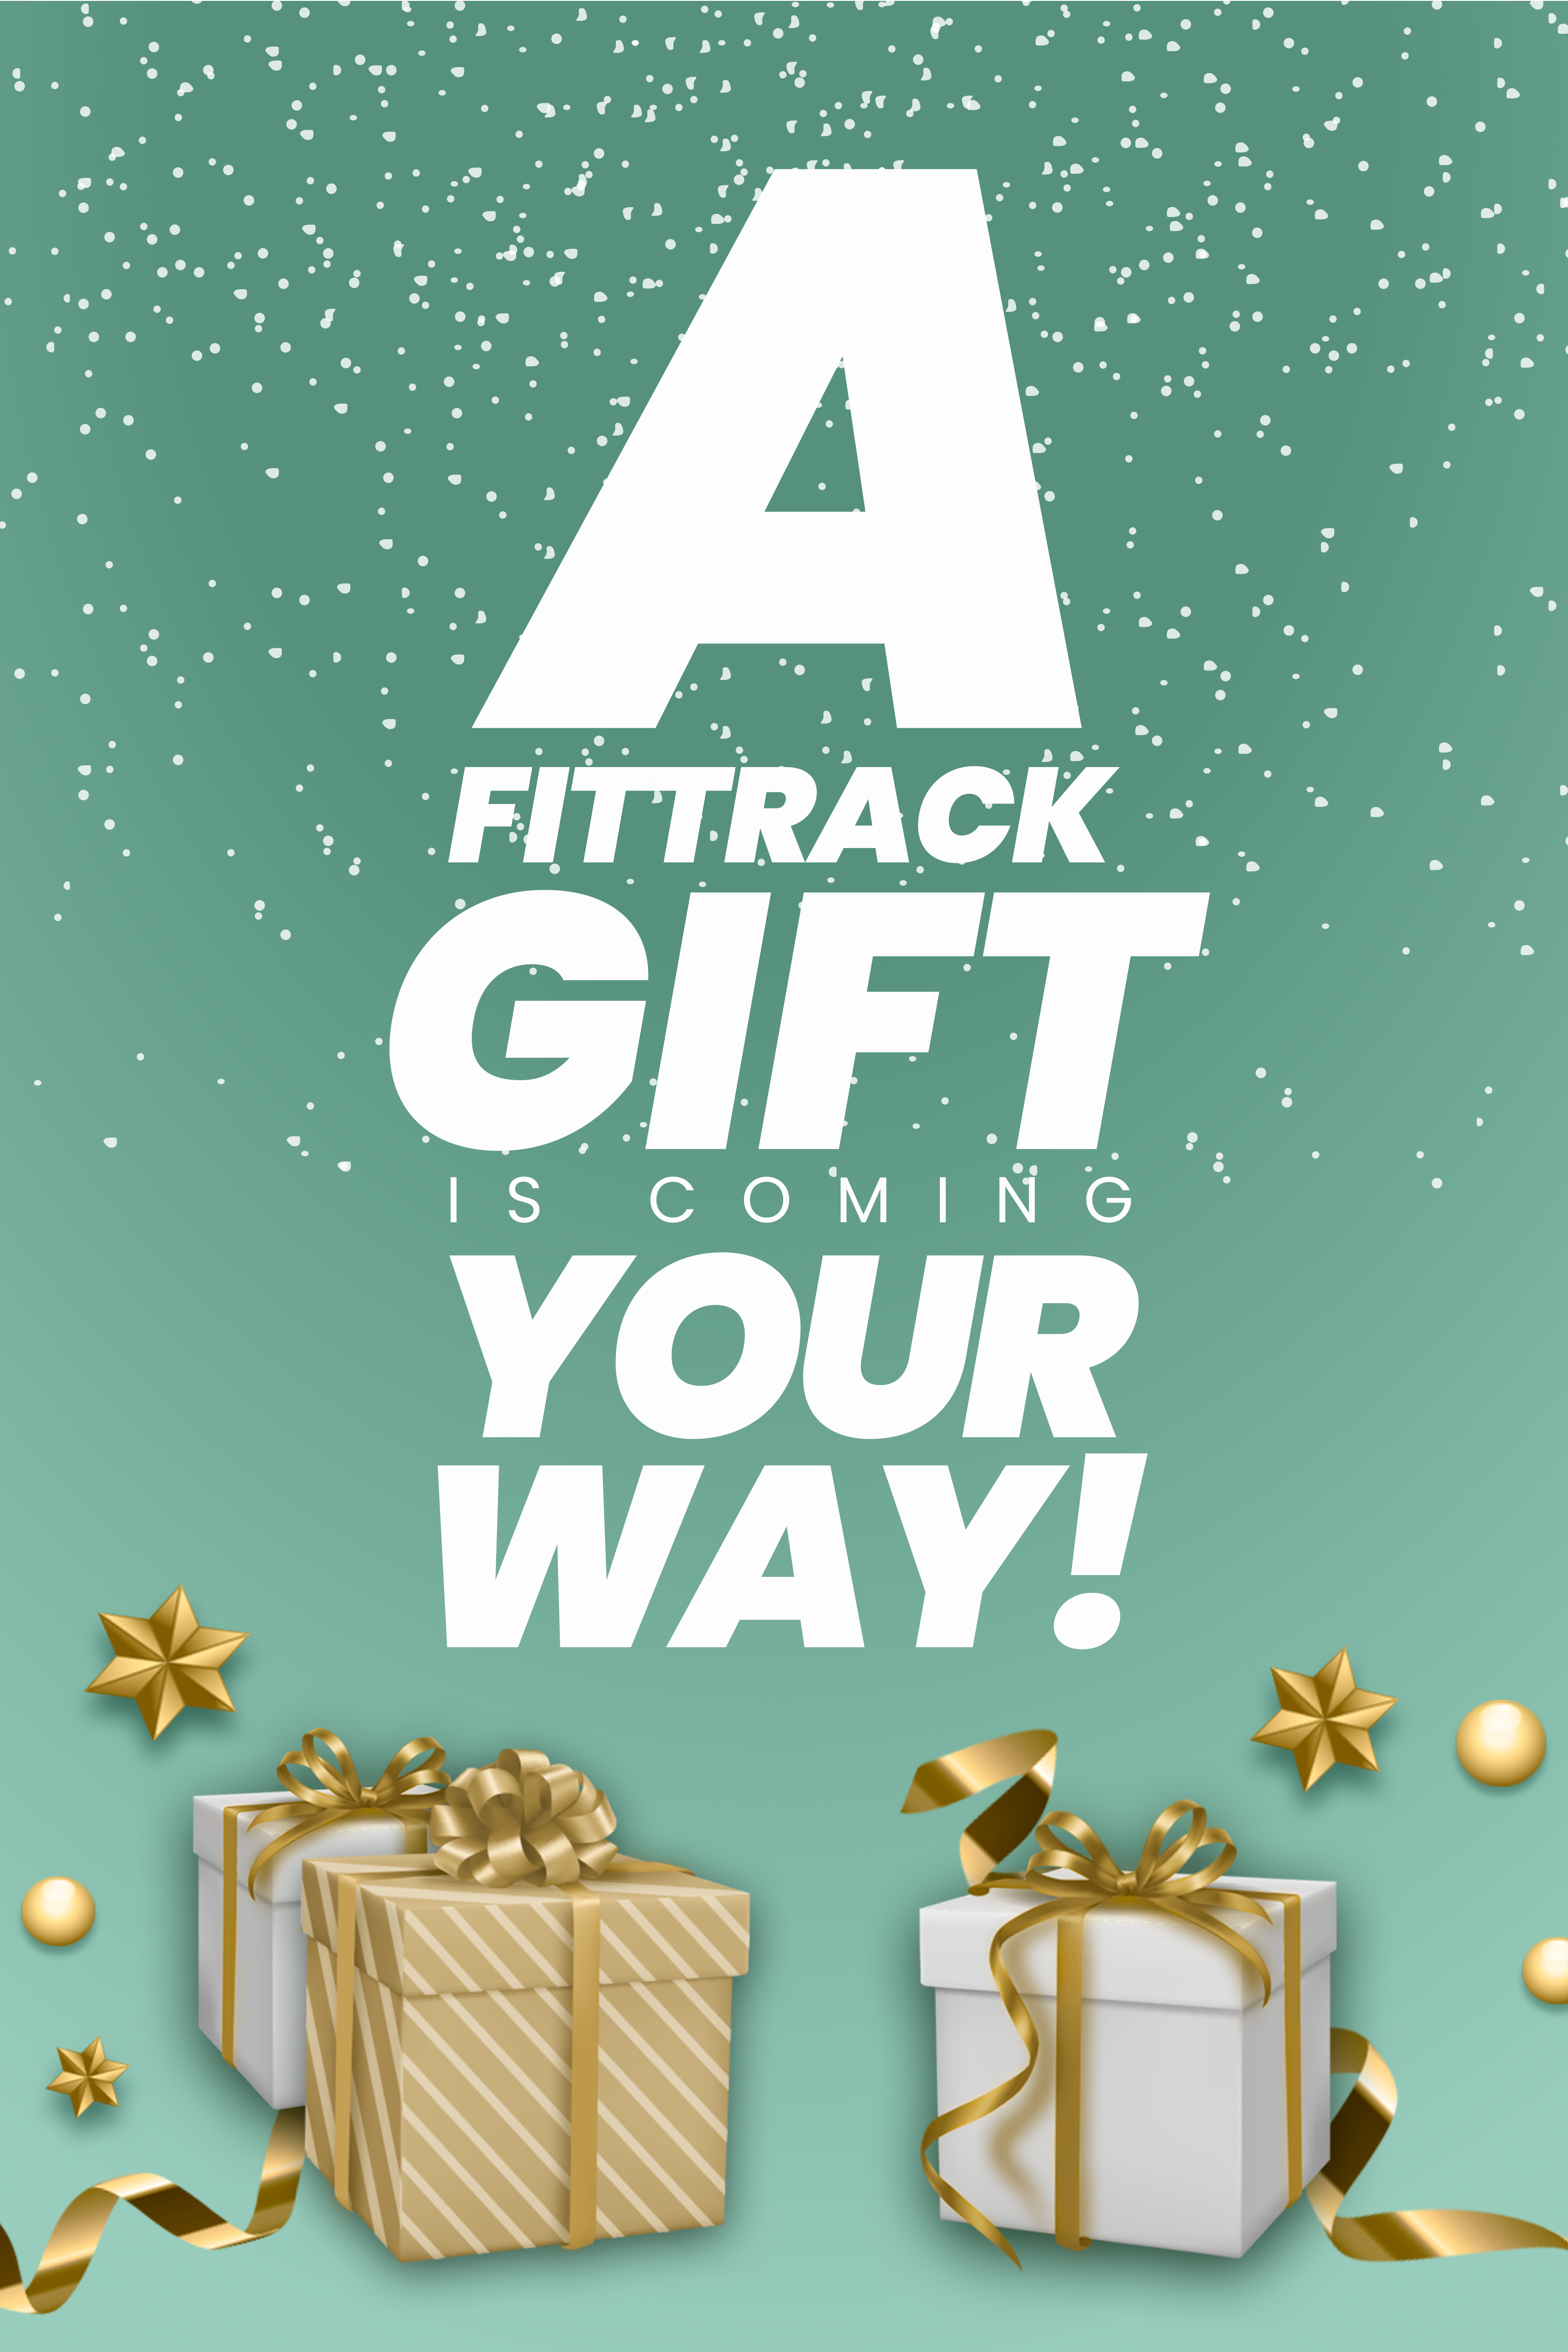 A FitTrack Gift is Coming Your Way